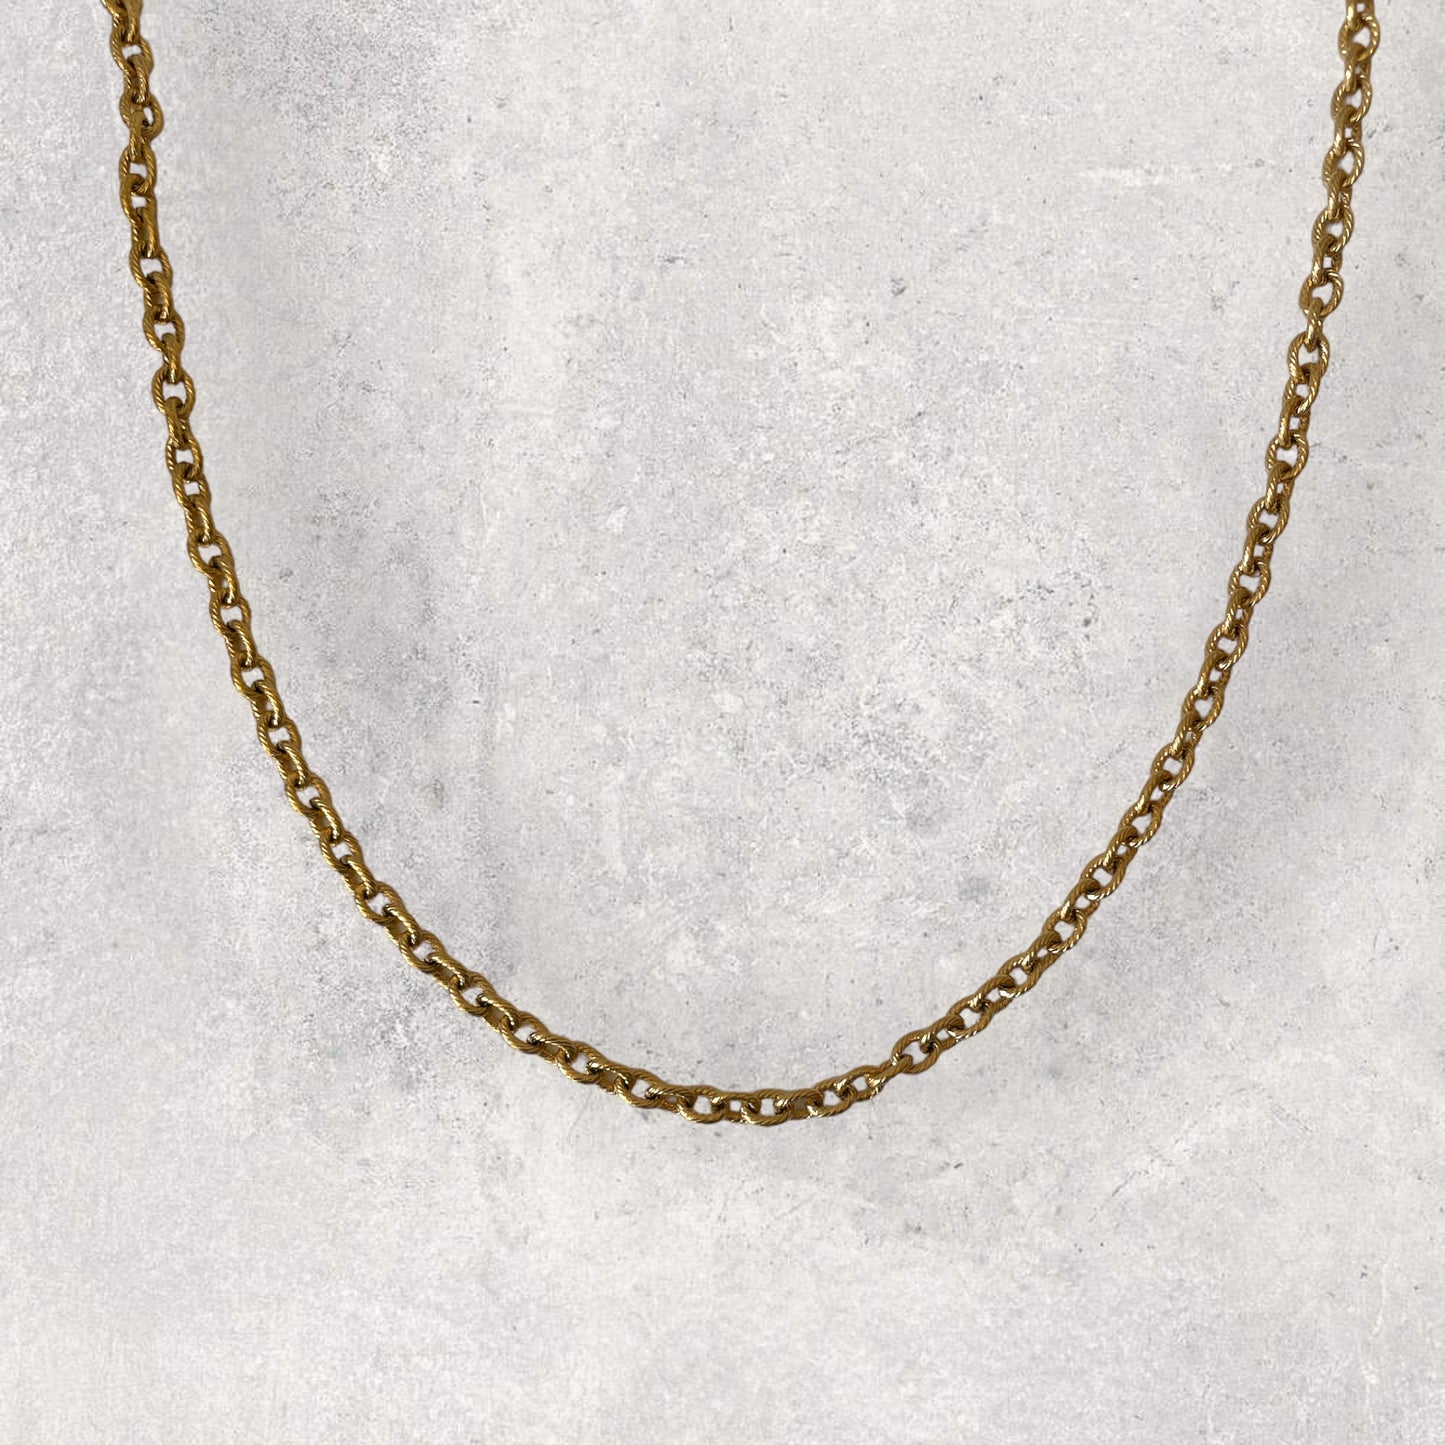 'DOUBLE CHAINED' necklace DYO base